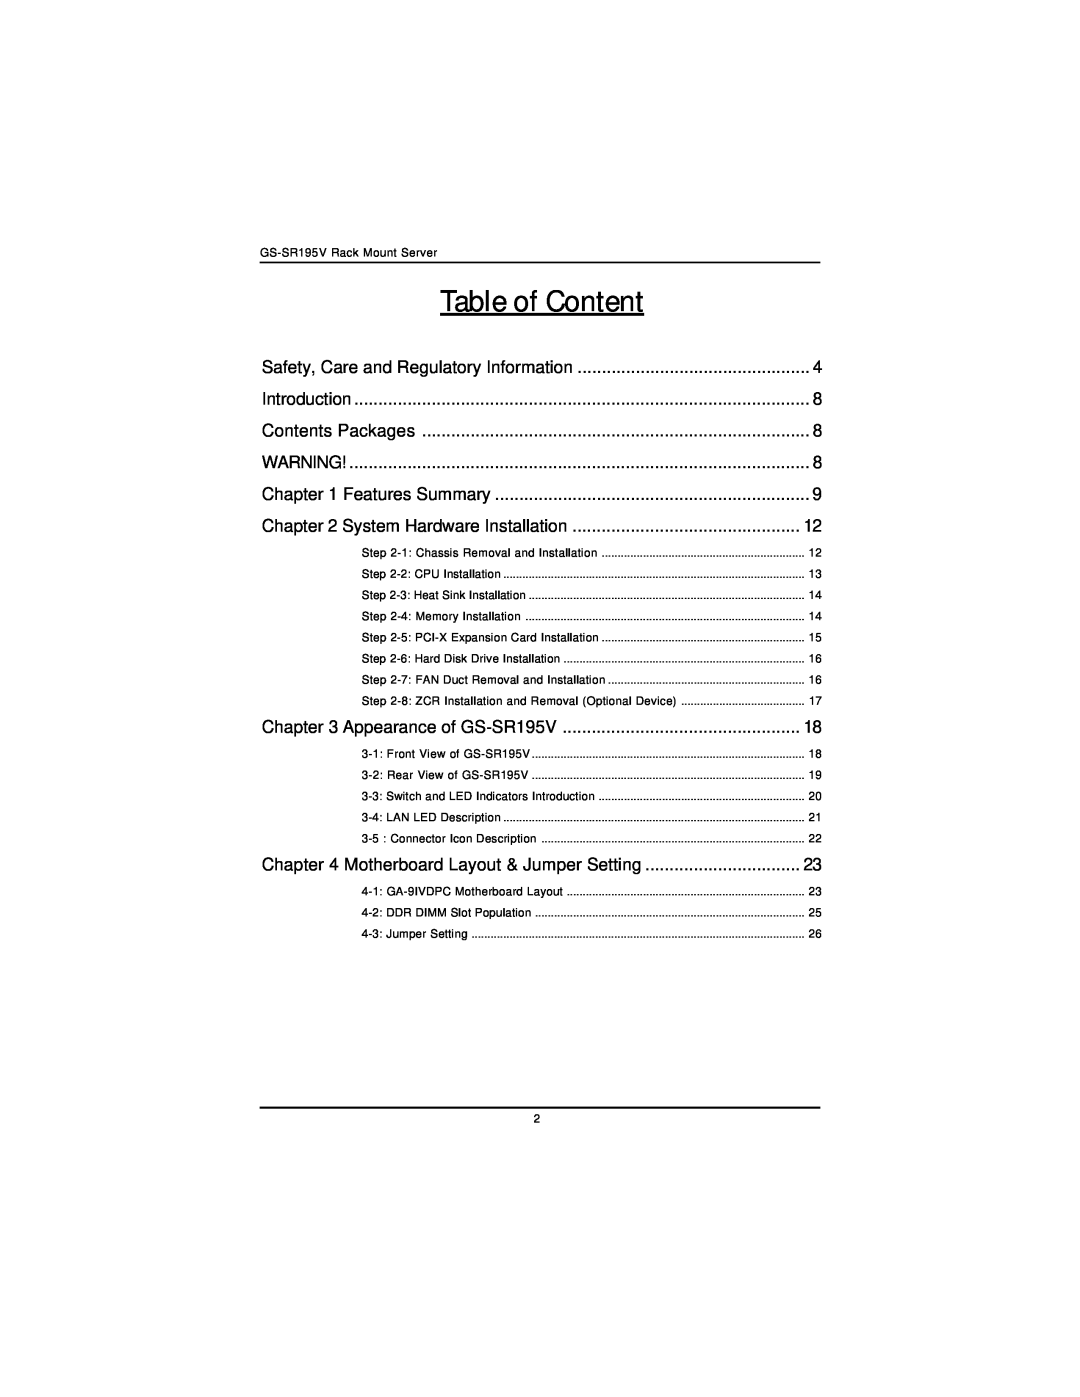 Intel GS-SR195V manual Table of Content, Safety, Care and Regulatory Information, Introduction, Contents Packages 